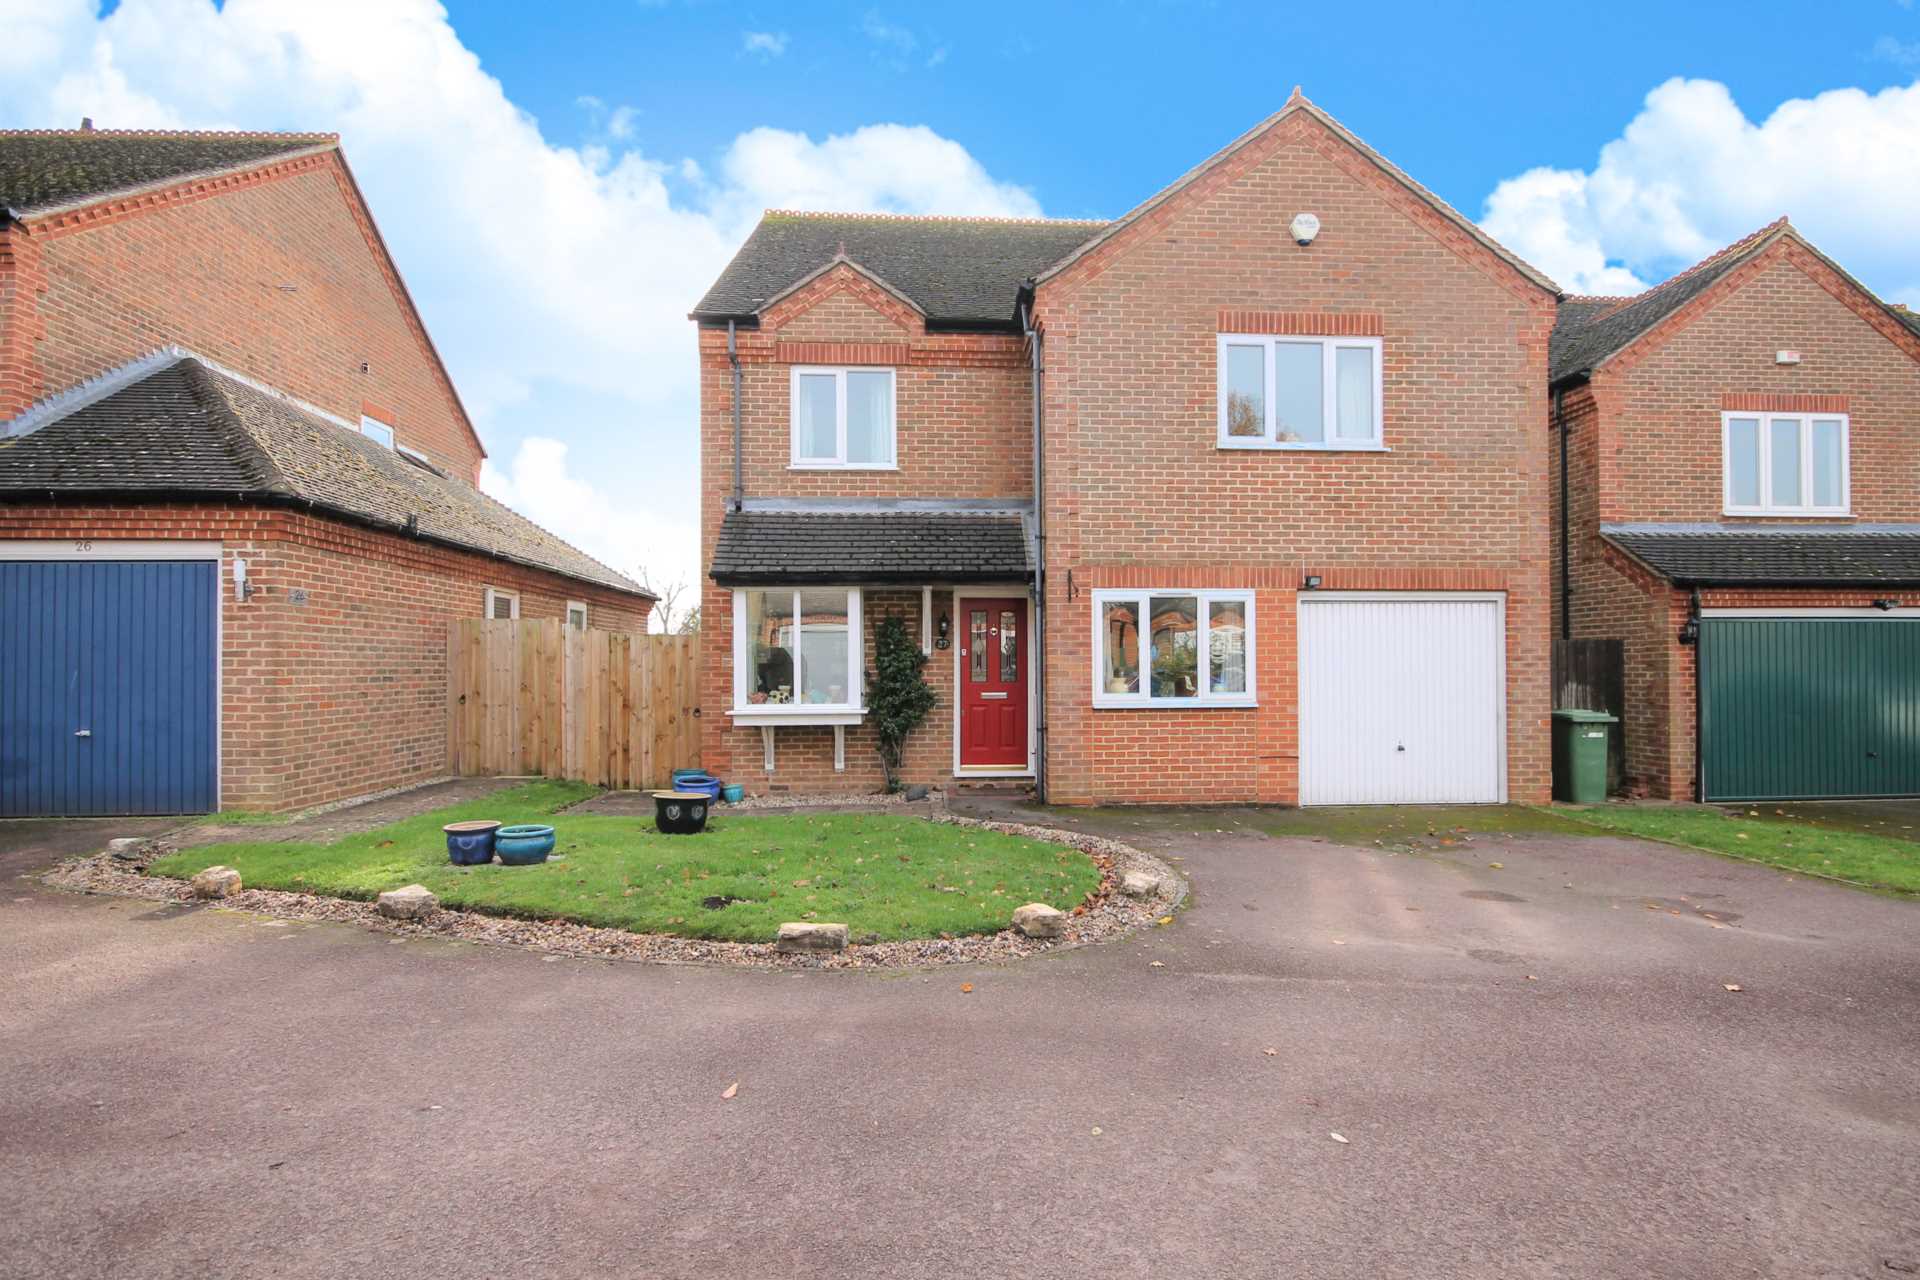 4 bed Detached House for rent in Newell Green. From Sears Property - Bracknell